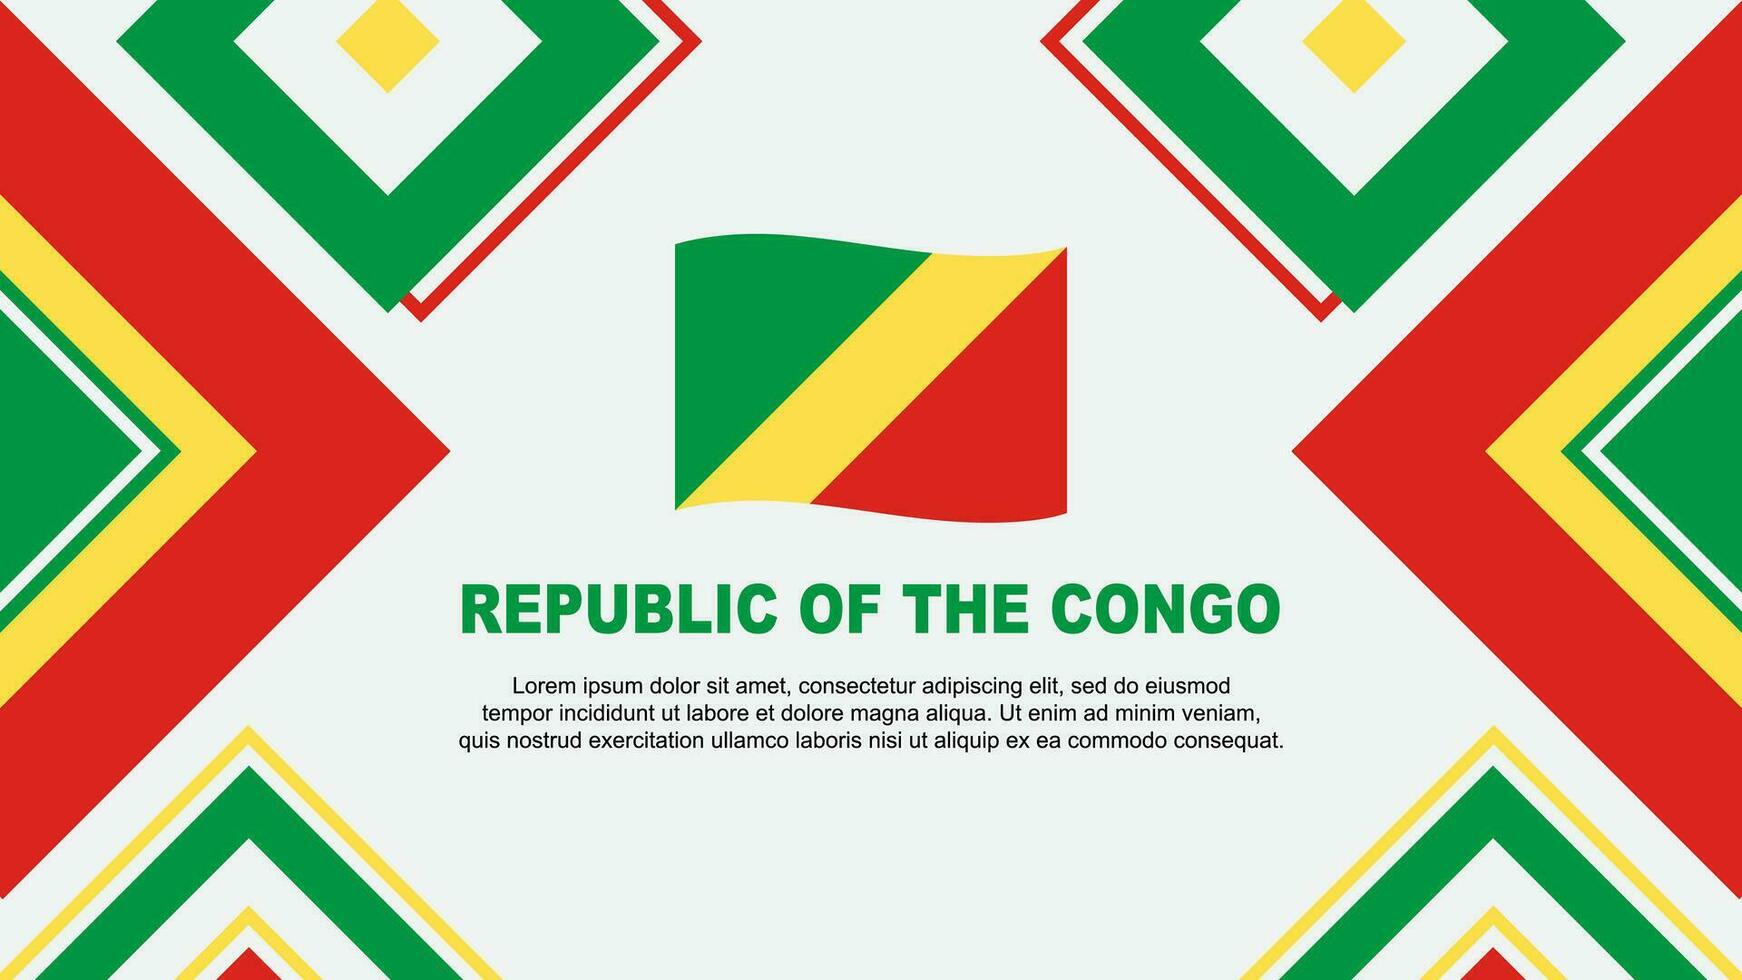 Republic Of The Congo Flag Abstract Background Design Template. Republic Of The Congo Independence Day Banner Wallpaper Vector Illustration. Republic Of The Congo Independence Day